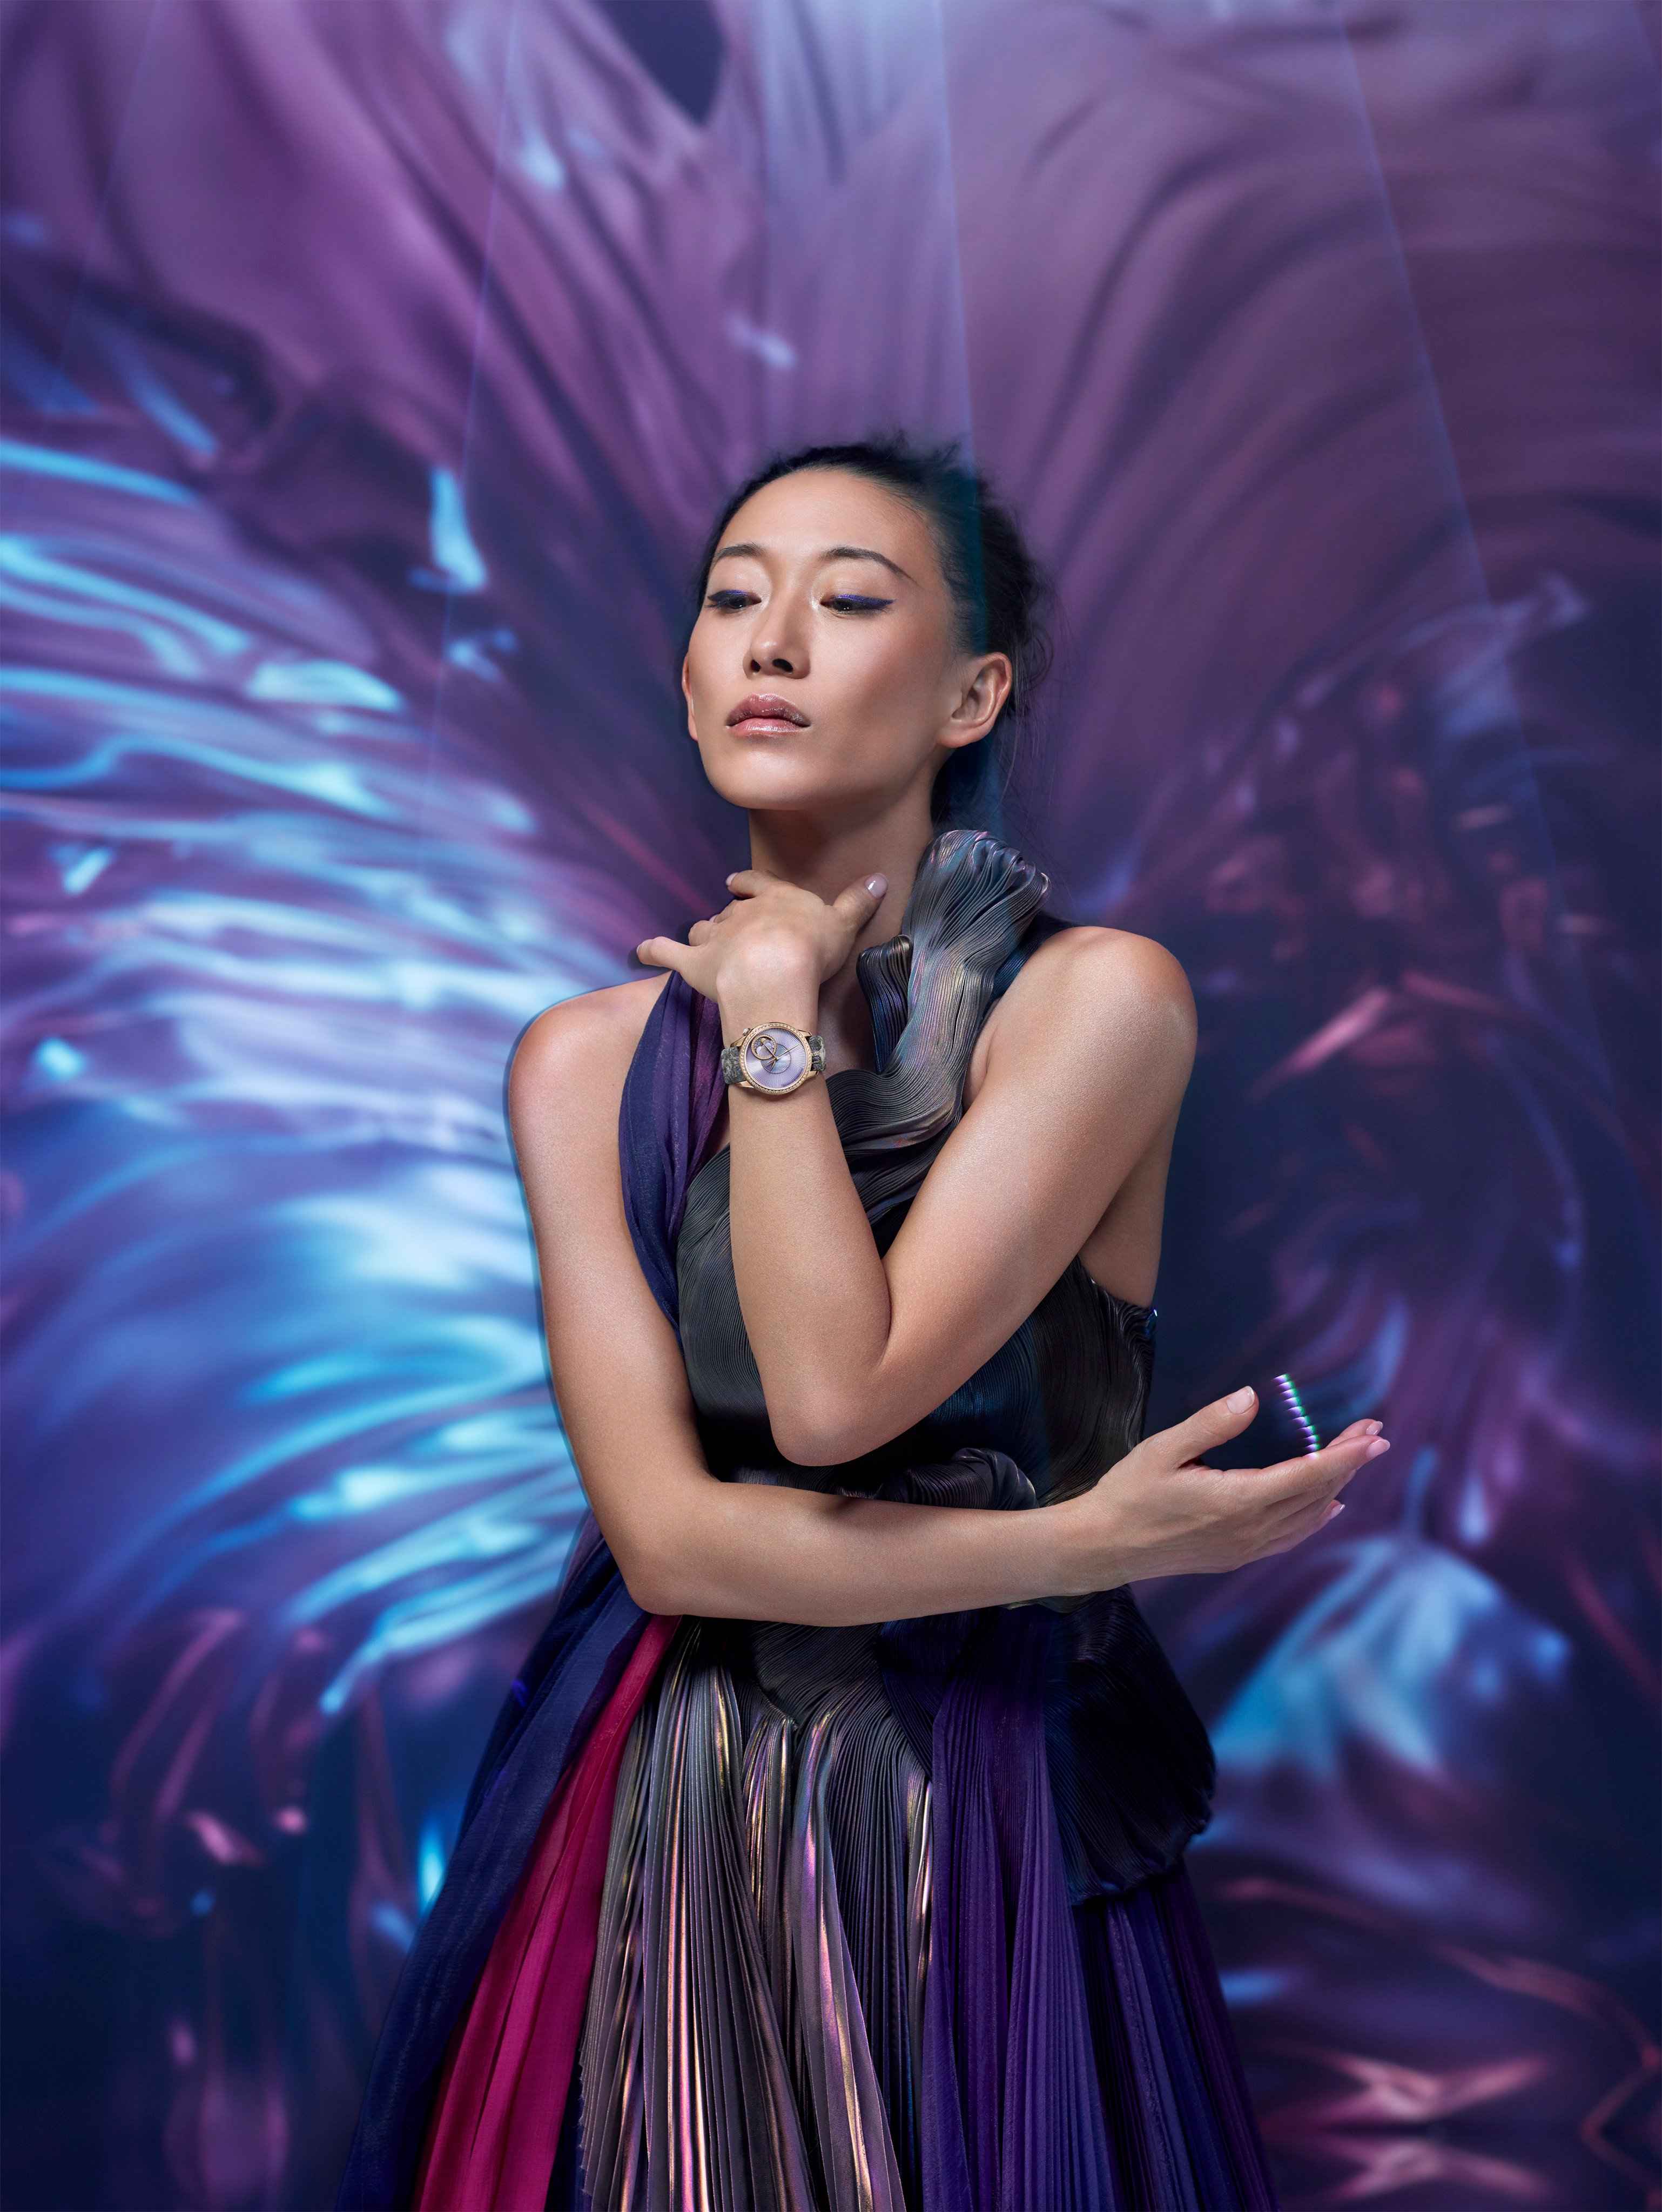 Working with fashion designer Yiqing Yin, watchmaker Vacheron Constantin has produced the new Égérie: The Pleats of Time and Égérie Moon Phase models